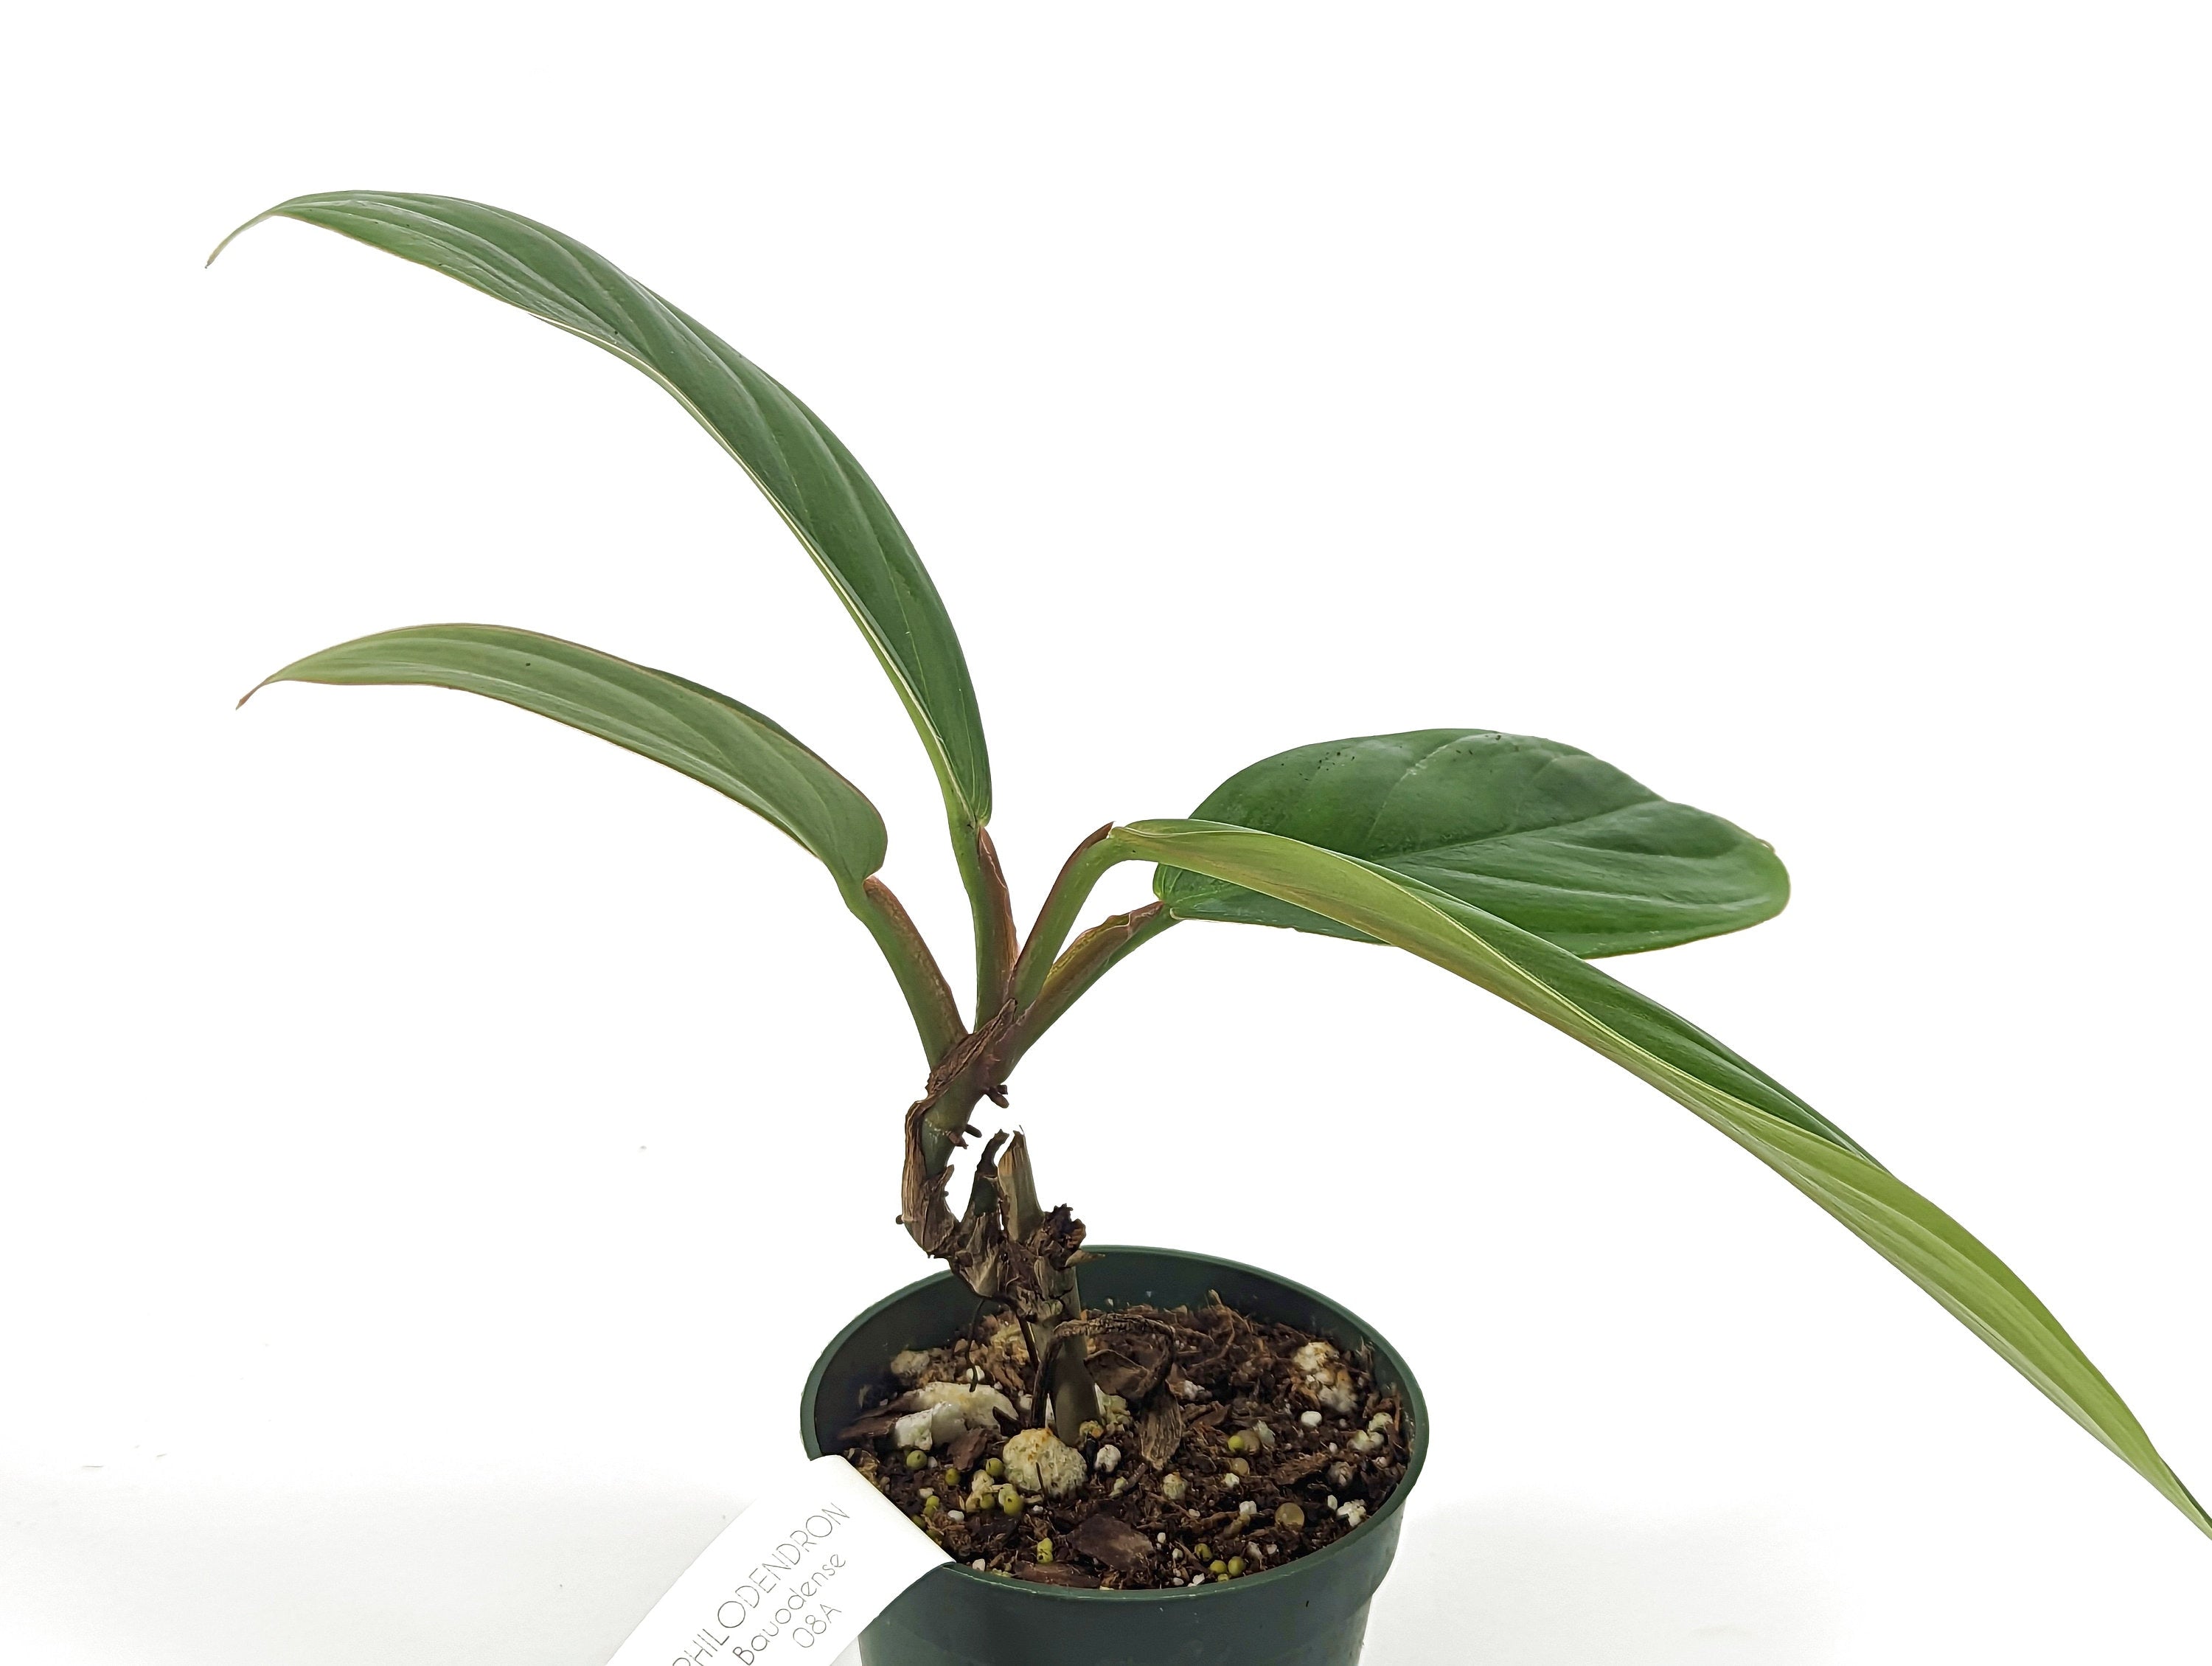 Philodendron Baudoense